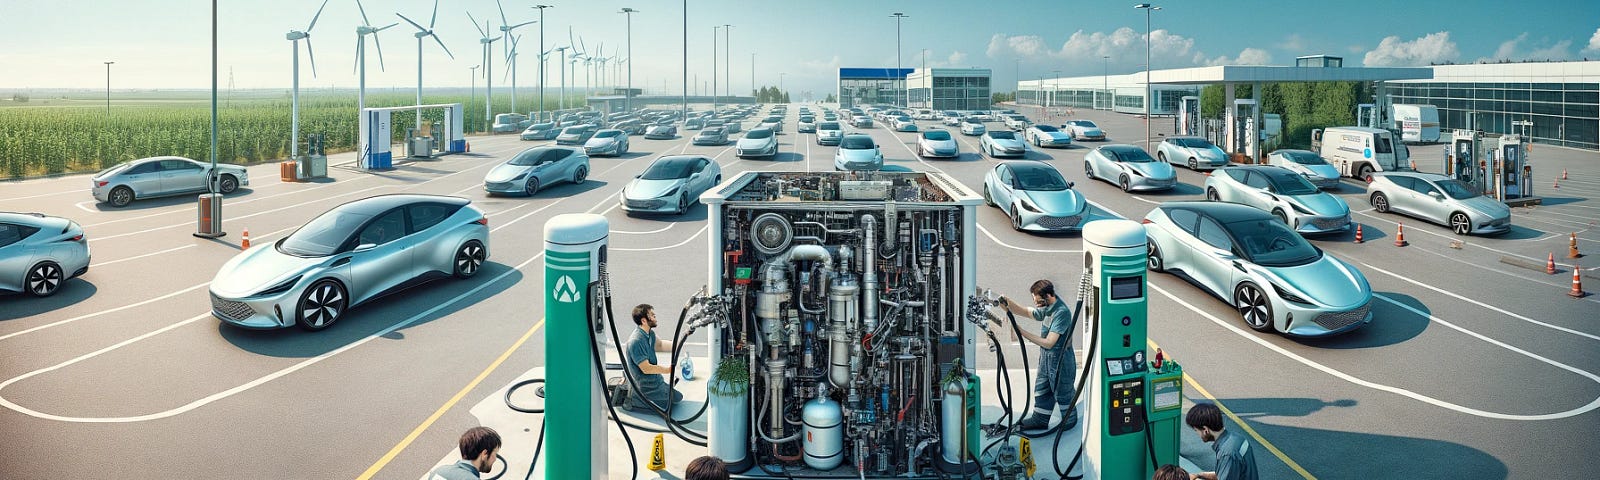 ChatGPT & DALL-E generated panoramic image showcasing a hydrogen compressor at a refueling station being repaired by technicians, with hydrogen cars lined up waiting for fuel.